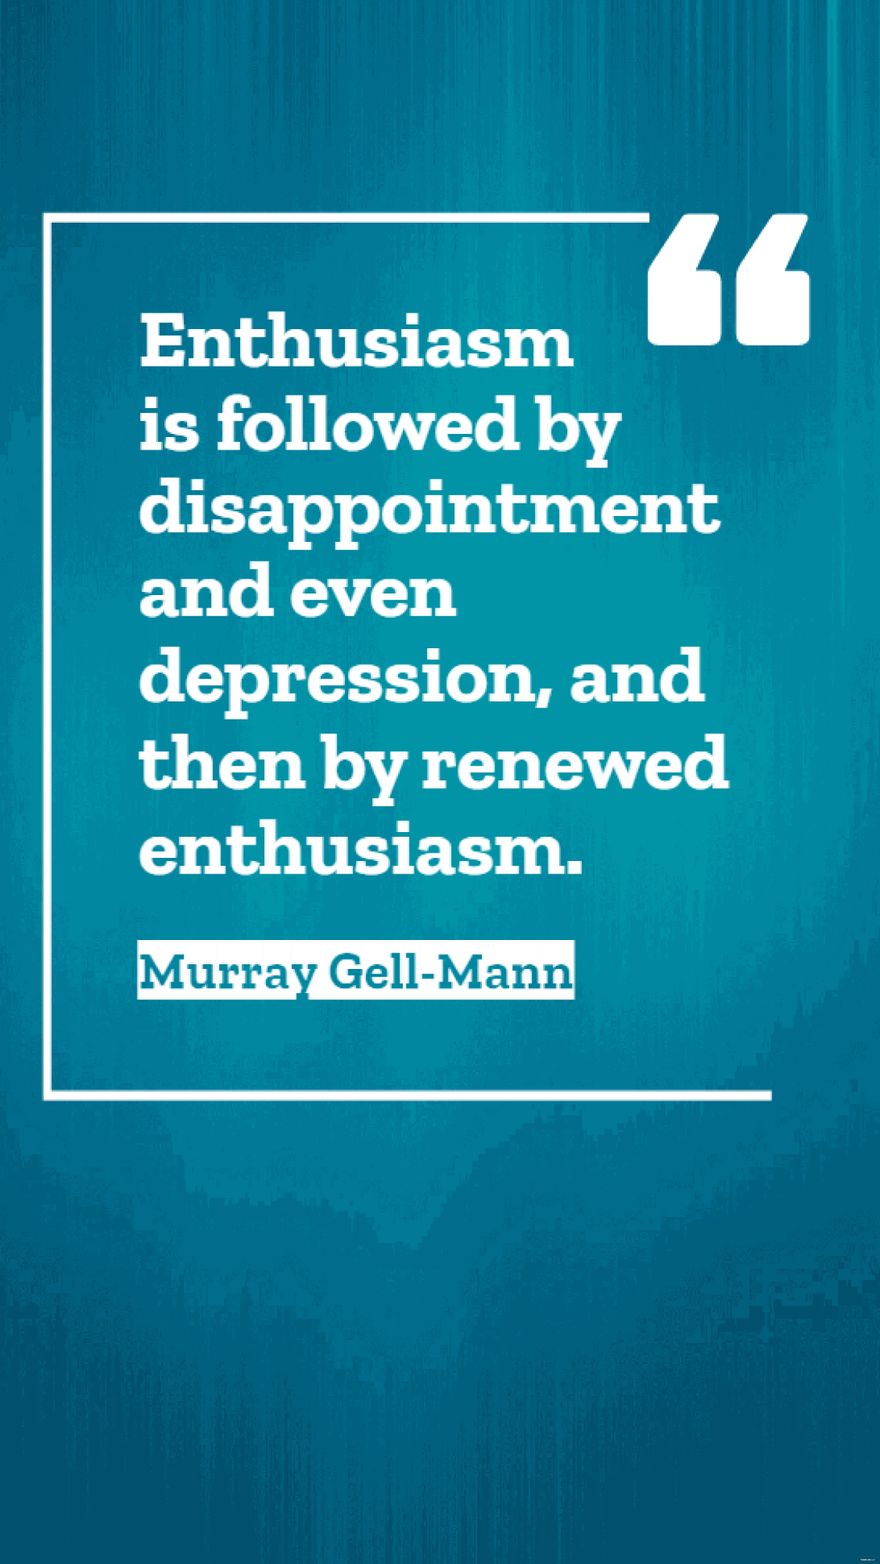 Murray Gell-Mann - Enthusiasm is followed by disappointment and even depression, and then by renewed enthusiasm.